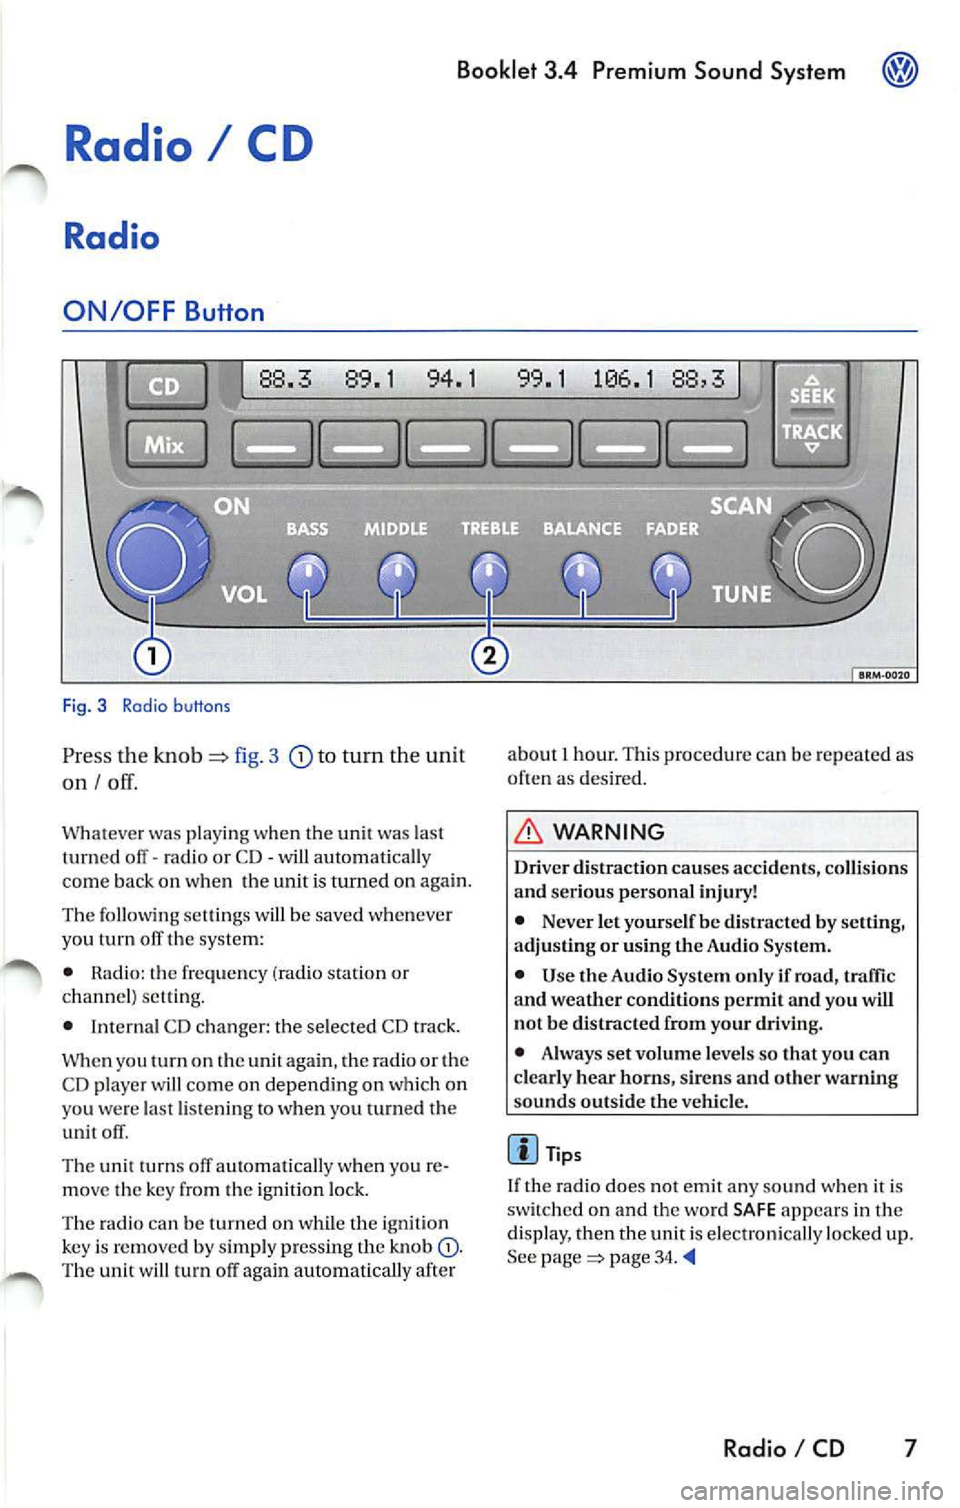 VOLKSWAGEN JETTA 2010  Owners Manual Booklet  3.4  Premium  Sound  System 
Radio I CD 
Radio 
ON /OFF Button 
88.3  89.1  94.1 
Fig. 3 Radio b uttons 
Pr ess  the  knob fig. 3 to turn  the unit 
on I 
Whatever  was playing  when the  uni